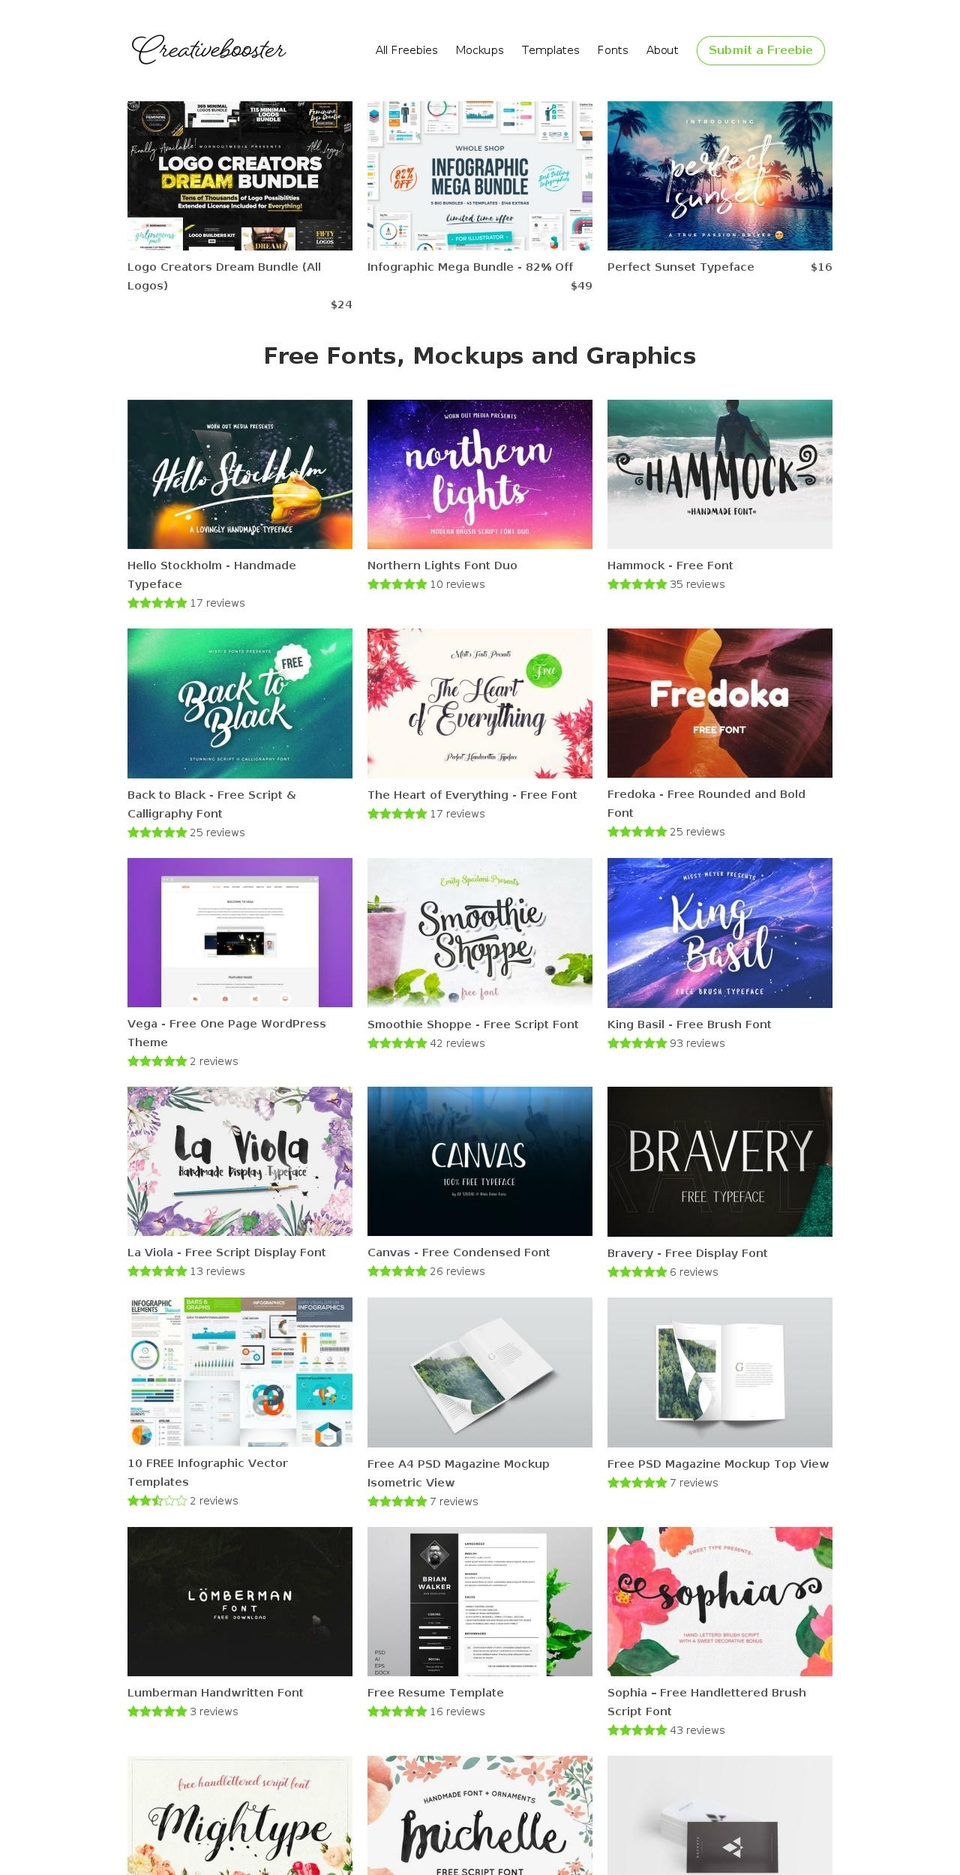 Dawn Shopify theme site example creativebooster.myshopify.com